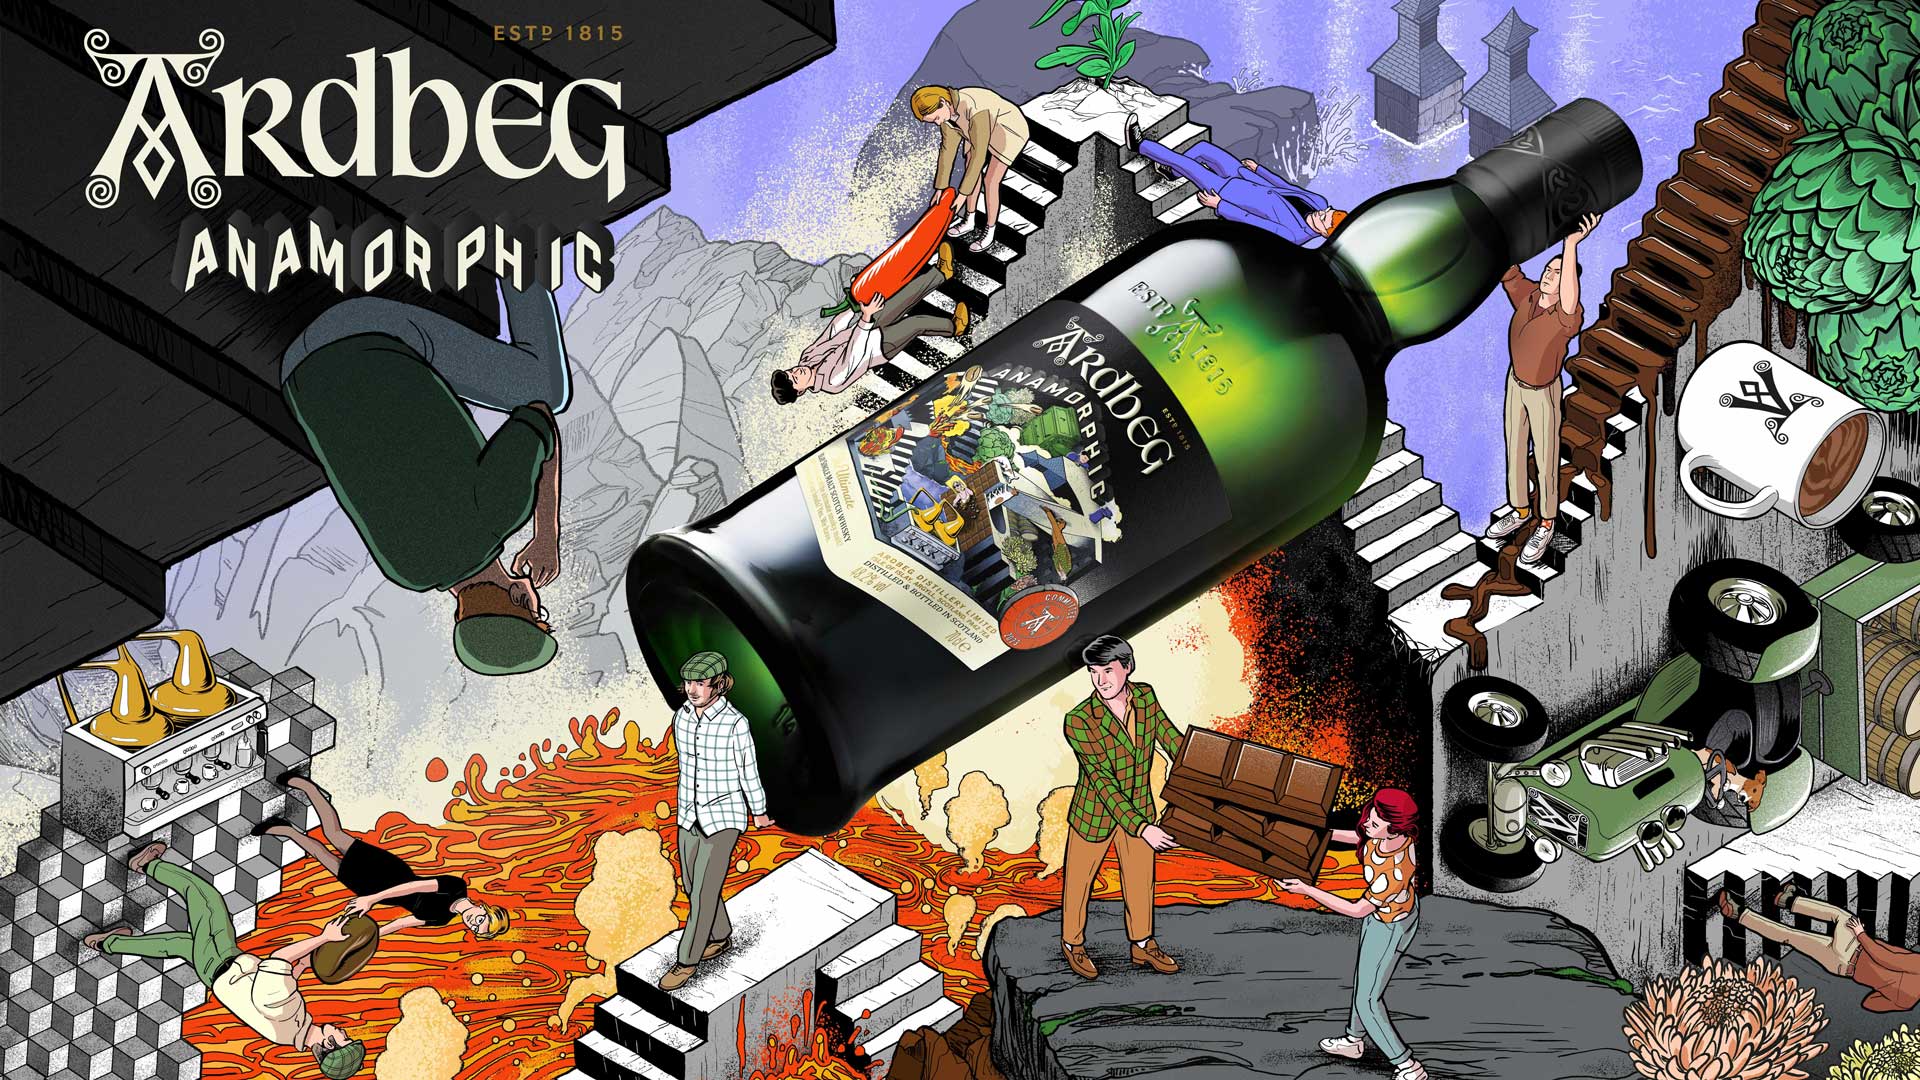 Ardbeg-Anamorphic-limited-edition-coqtail-milano